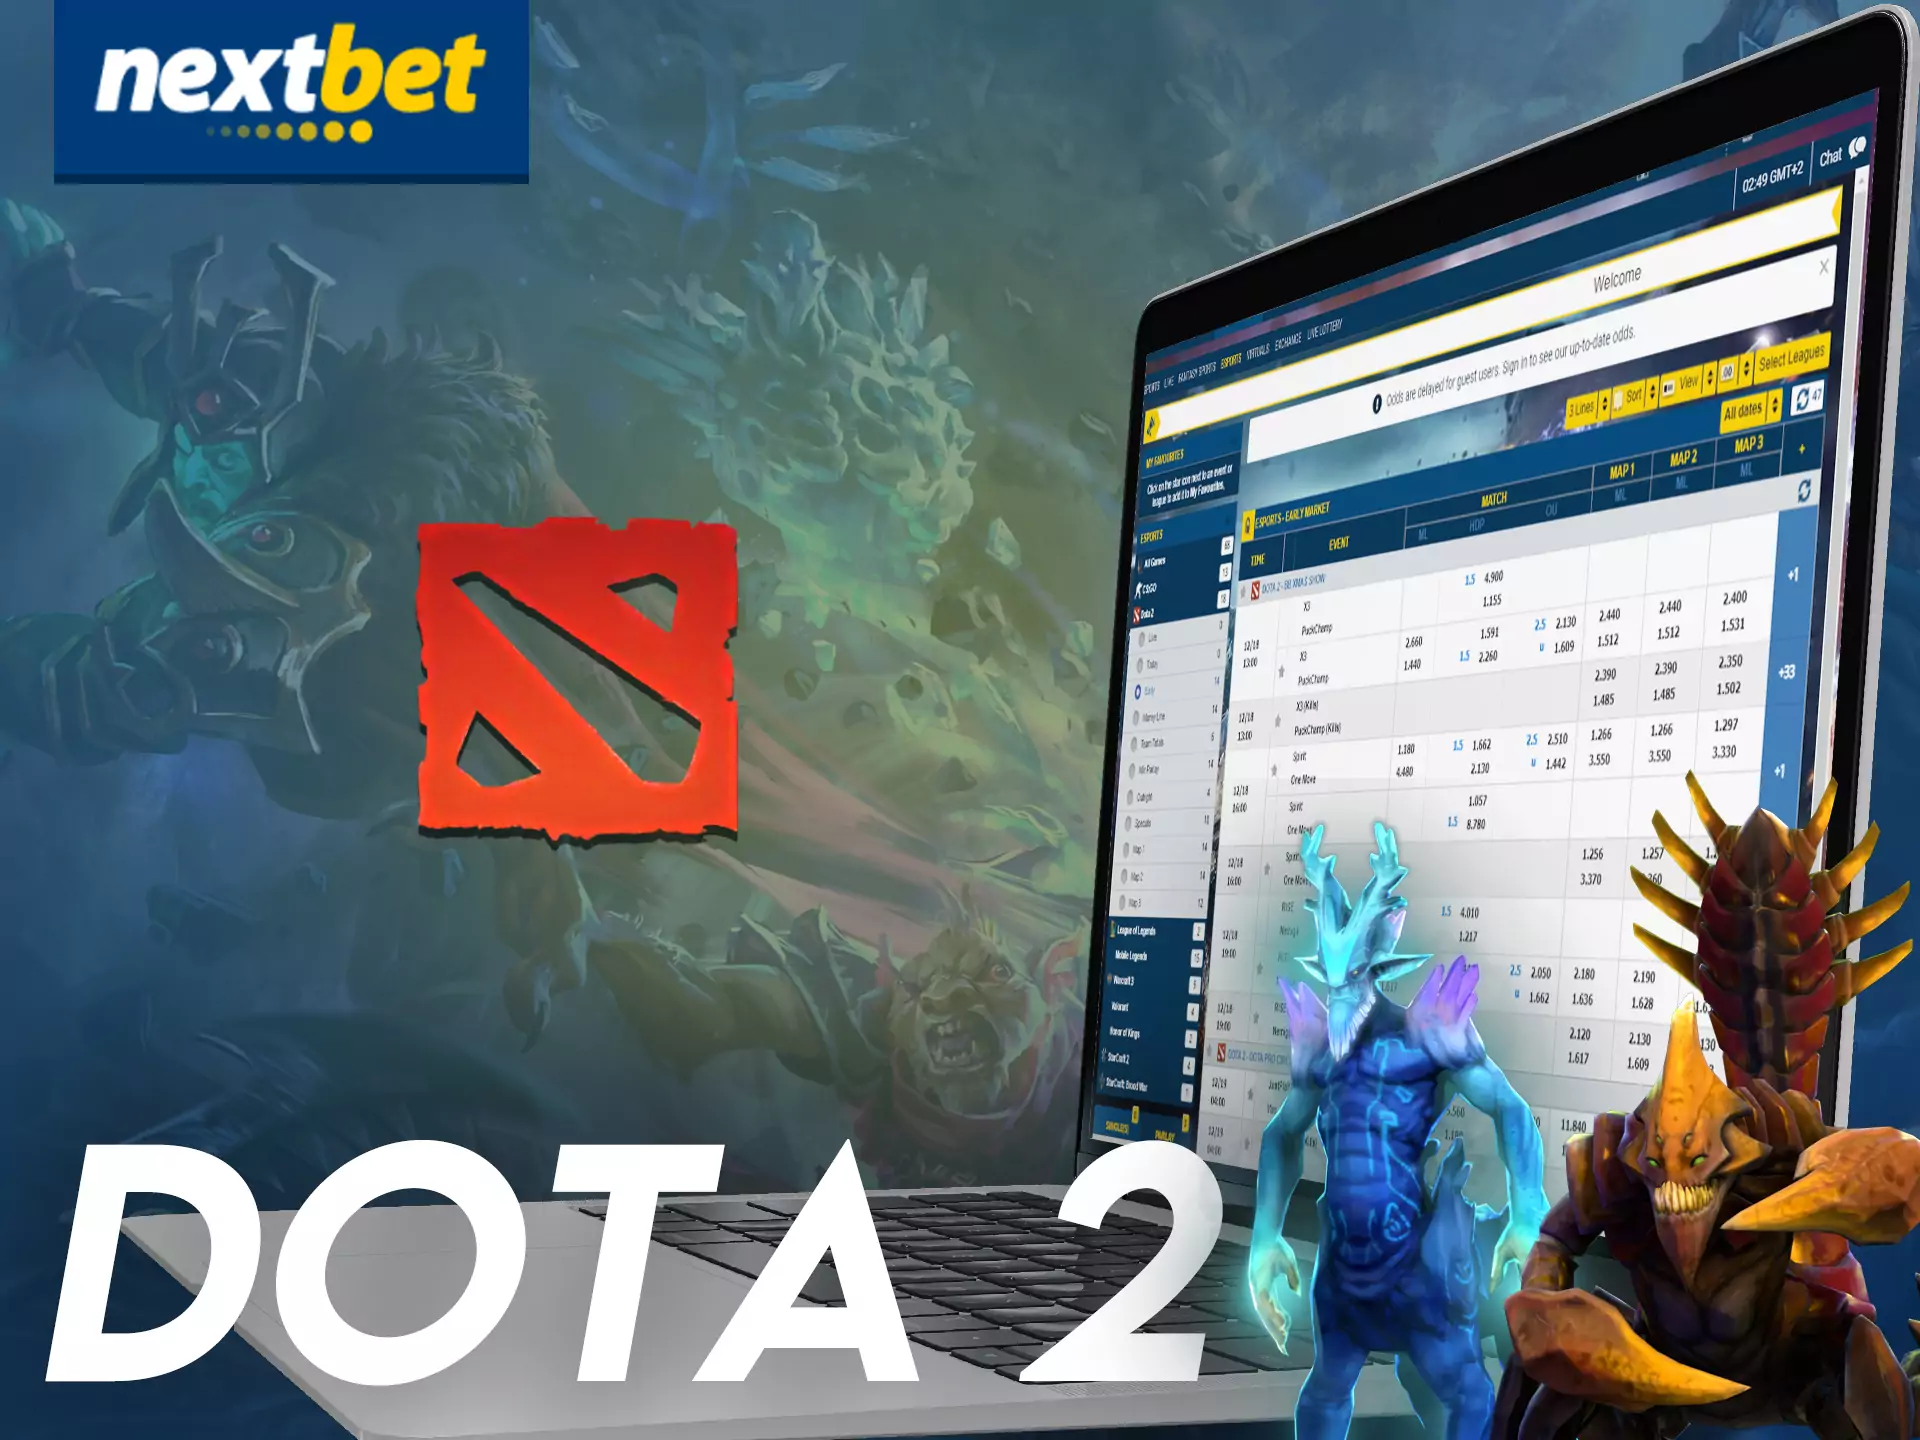 If you are a Dota 2 fan, then place your bet on your favorite team in Nextbet.